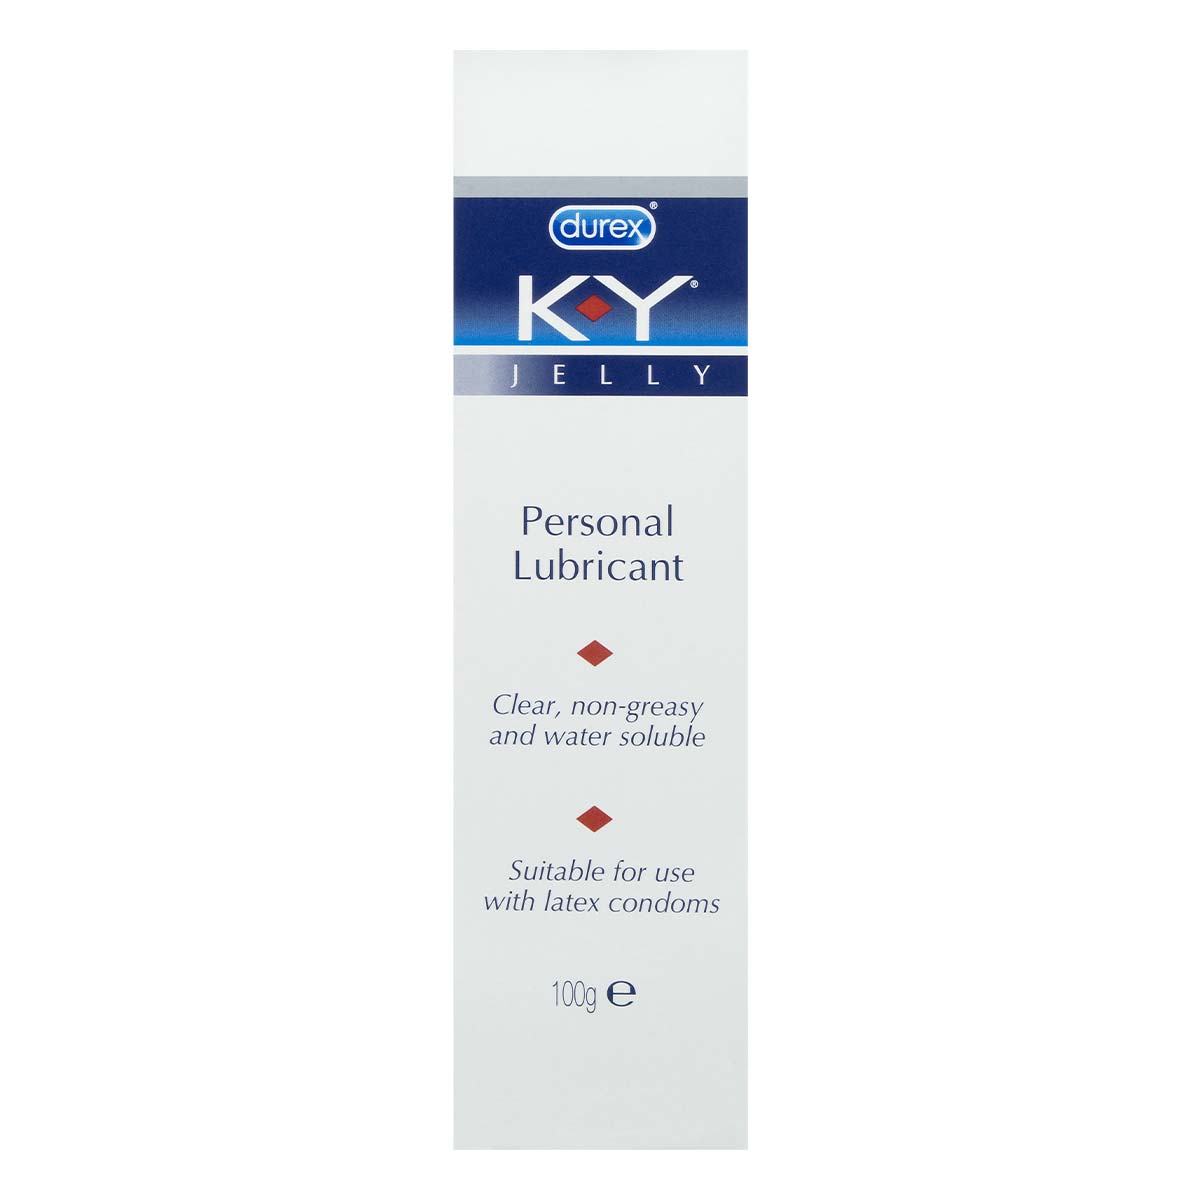 Durex K-Y Jelly 100g Water-based Lubricant-thumb_2